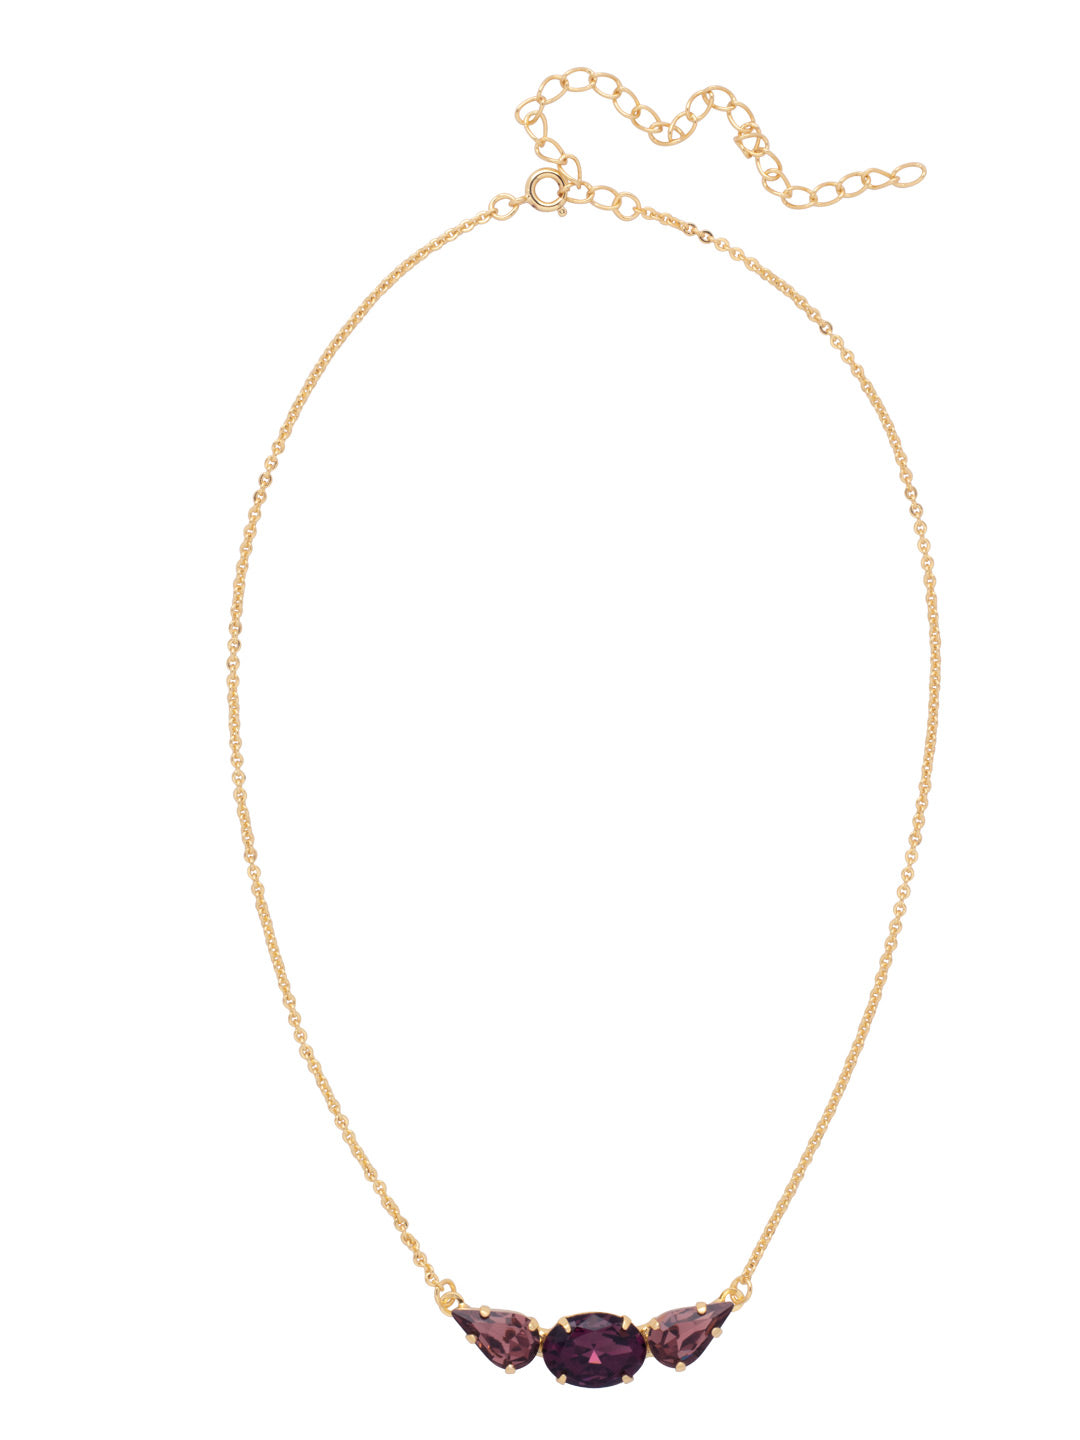 Oval and Pear Tennis Necklace - NFL14BGMRL - <p>The Oval and Pear Tennis Necklace features alternating oval and pear cut crystals on an adjustable chain, secured by a lobster claw clasp. From Sorrelli's Merlot collection in our Bright Gold-tone finish.</p>